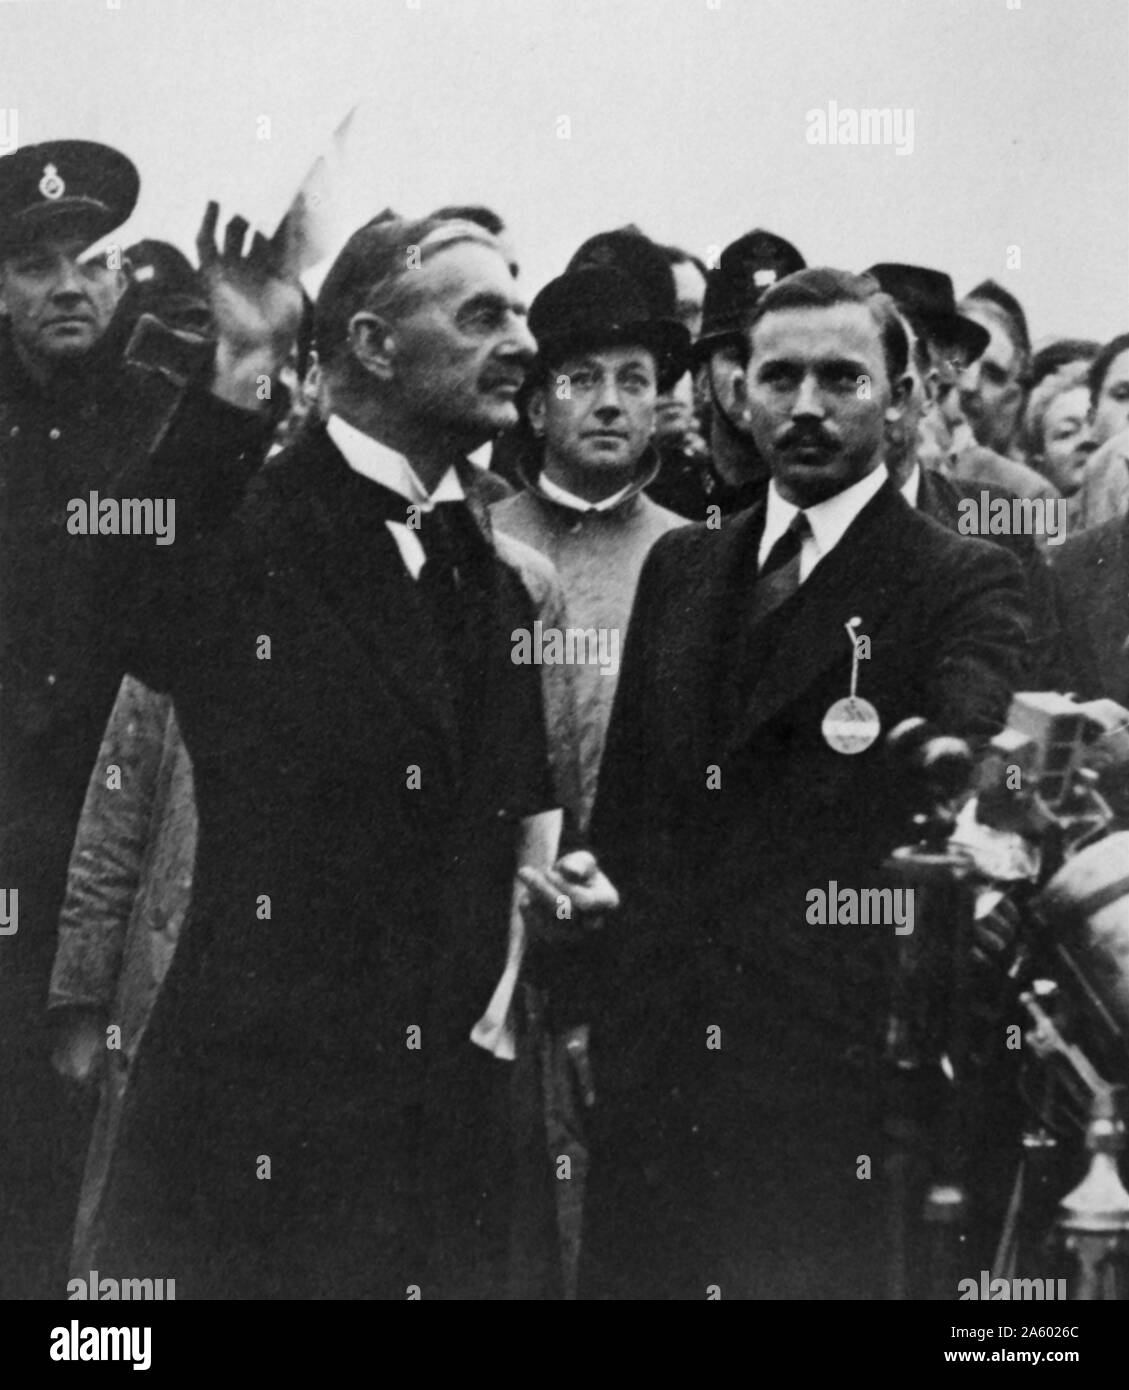 Neville Chamberlain (British Prime Minister returns from signing the Munich Agreement 1938. The agreement was a settlement permitting Nazi Germany's annexation of portions of Czechoslovakia. it is widely regarded as a failed act of appeasement toward Germany. The agreement was signed in the early hours of 30 September 1938 Stock Photo